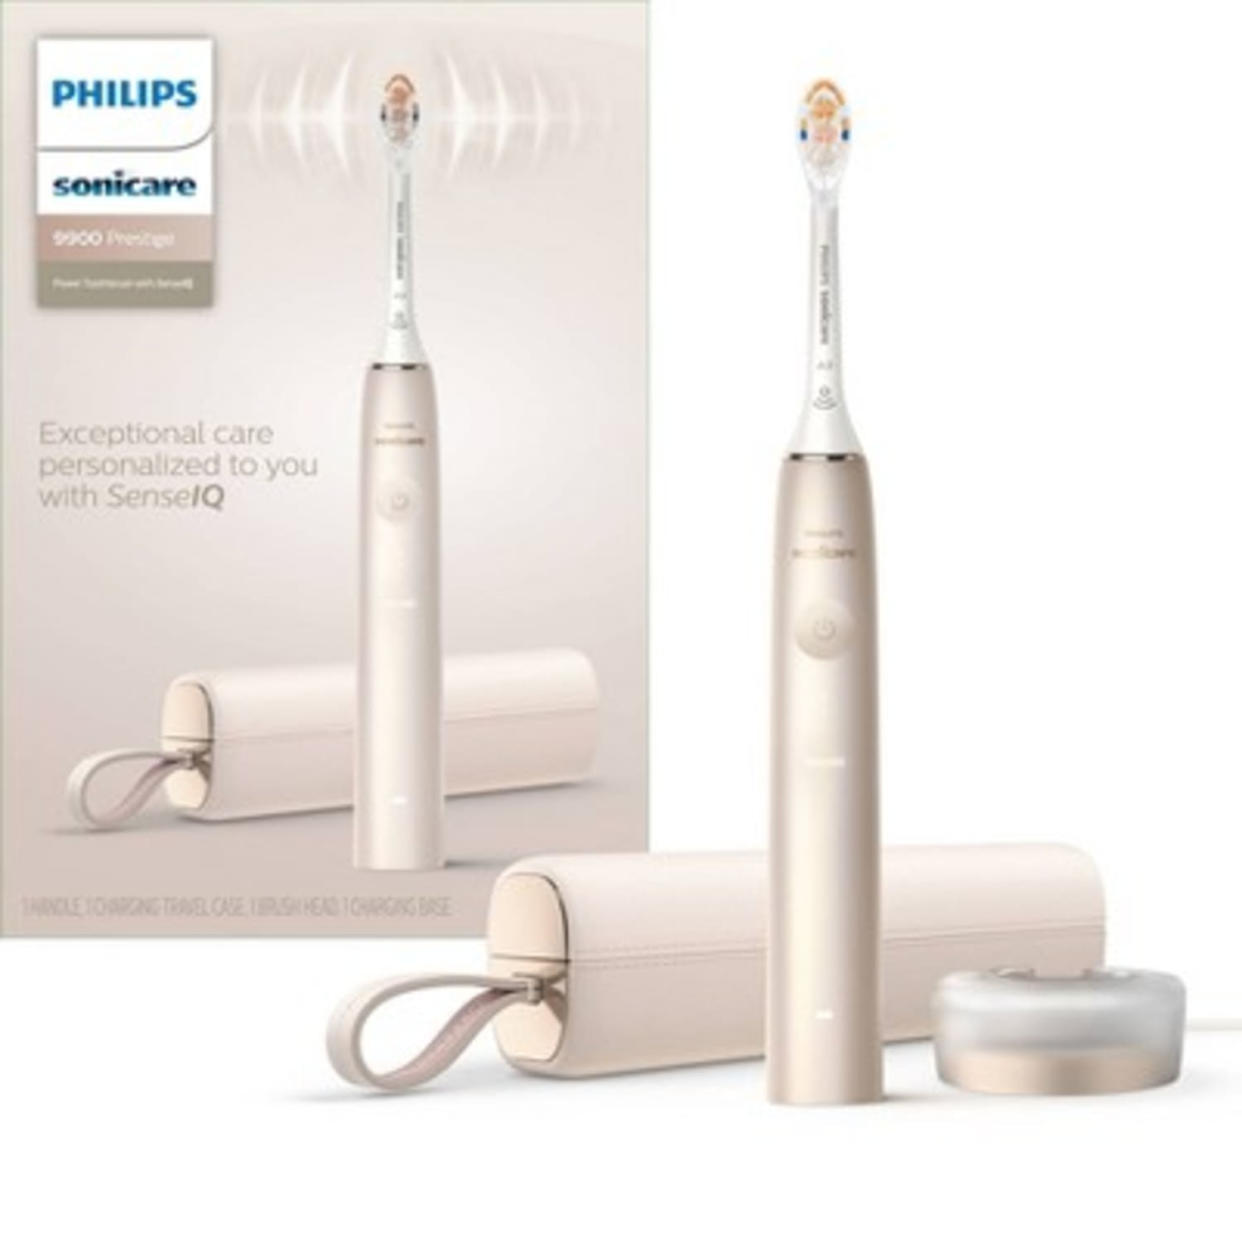 Philips Sonicare 9900 Prestige Rechargeable Electric Toothbrush - HX9990/11 (TARGET)